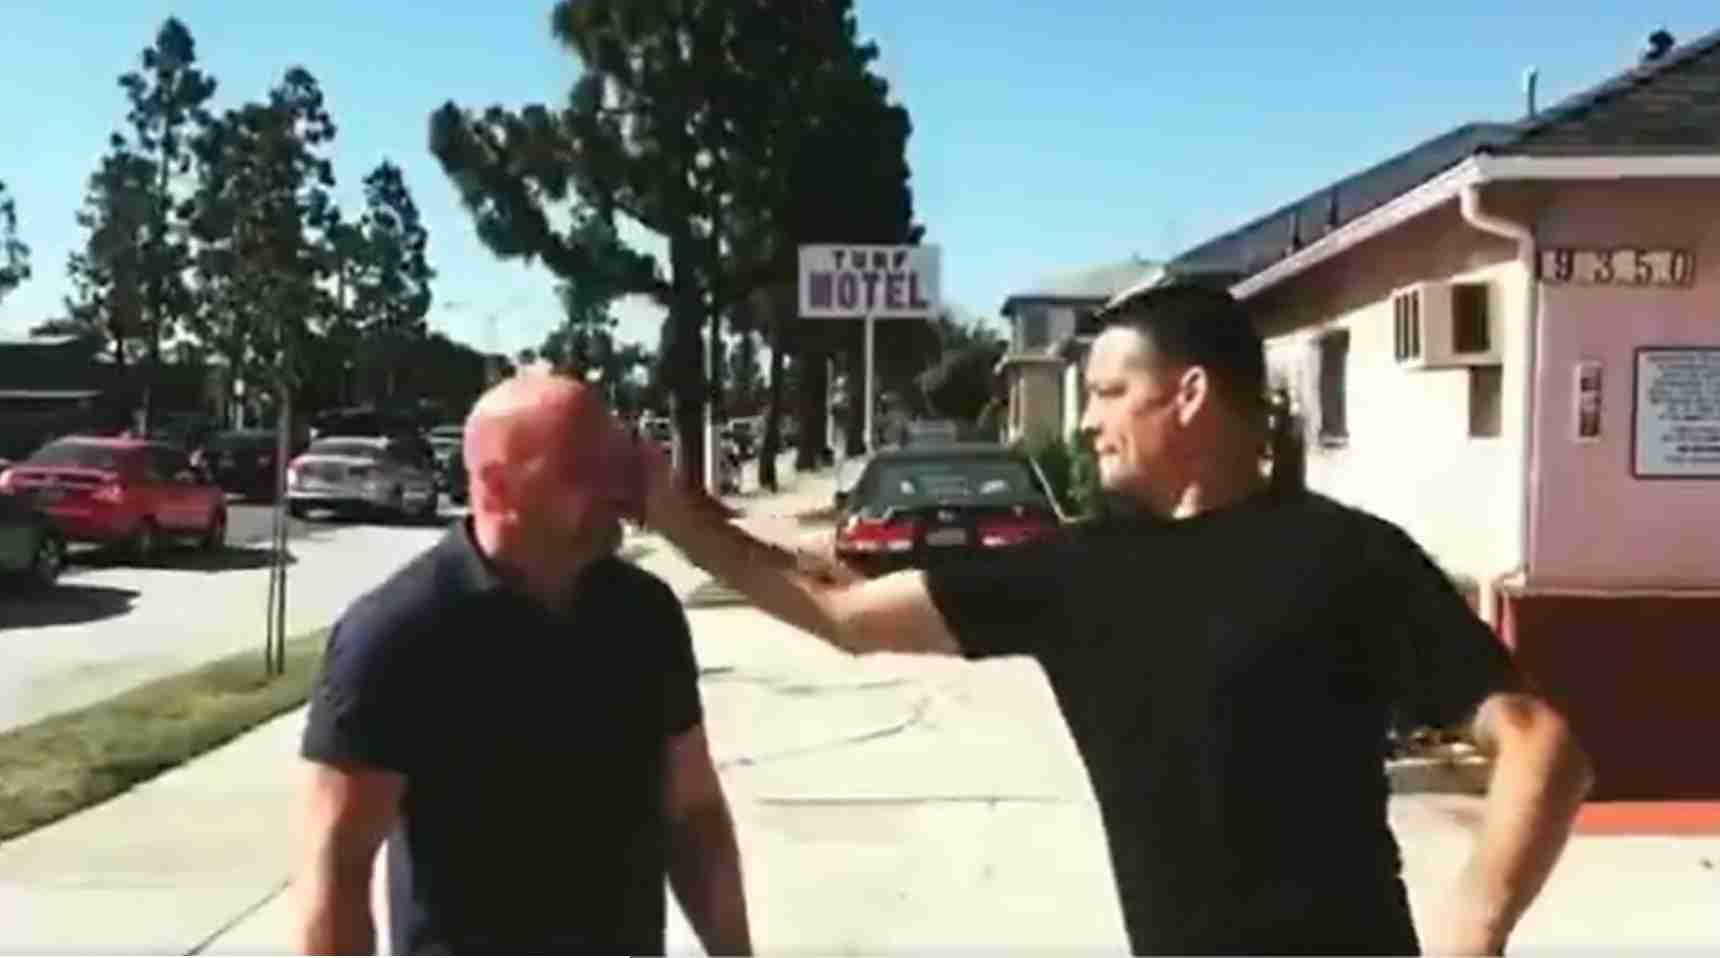 Diaz Stockton Slap Goes Viral After Will Smith Chris Rock Incident